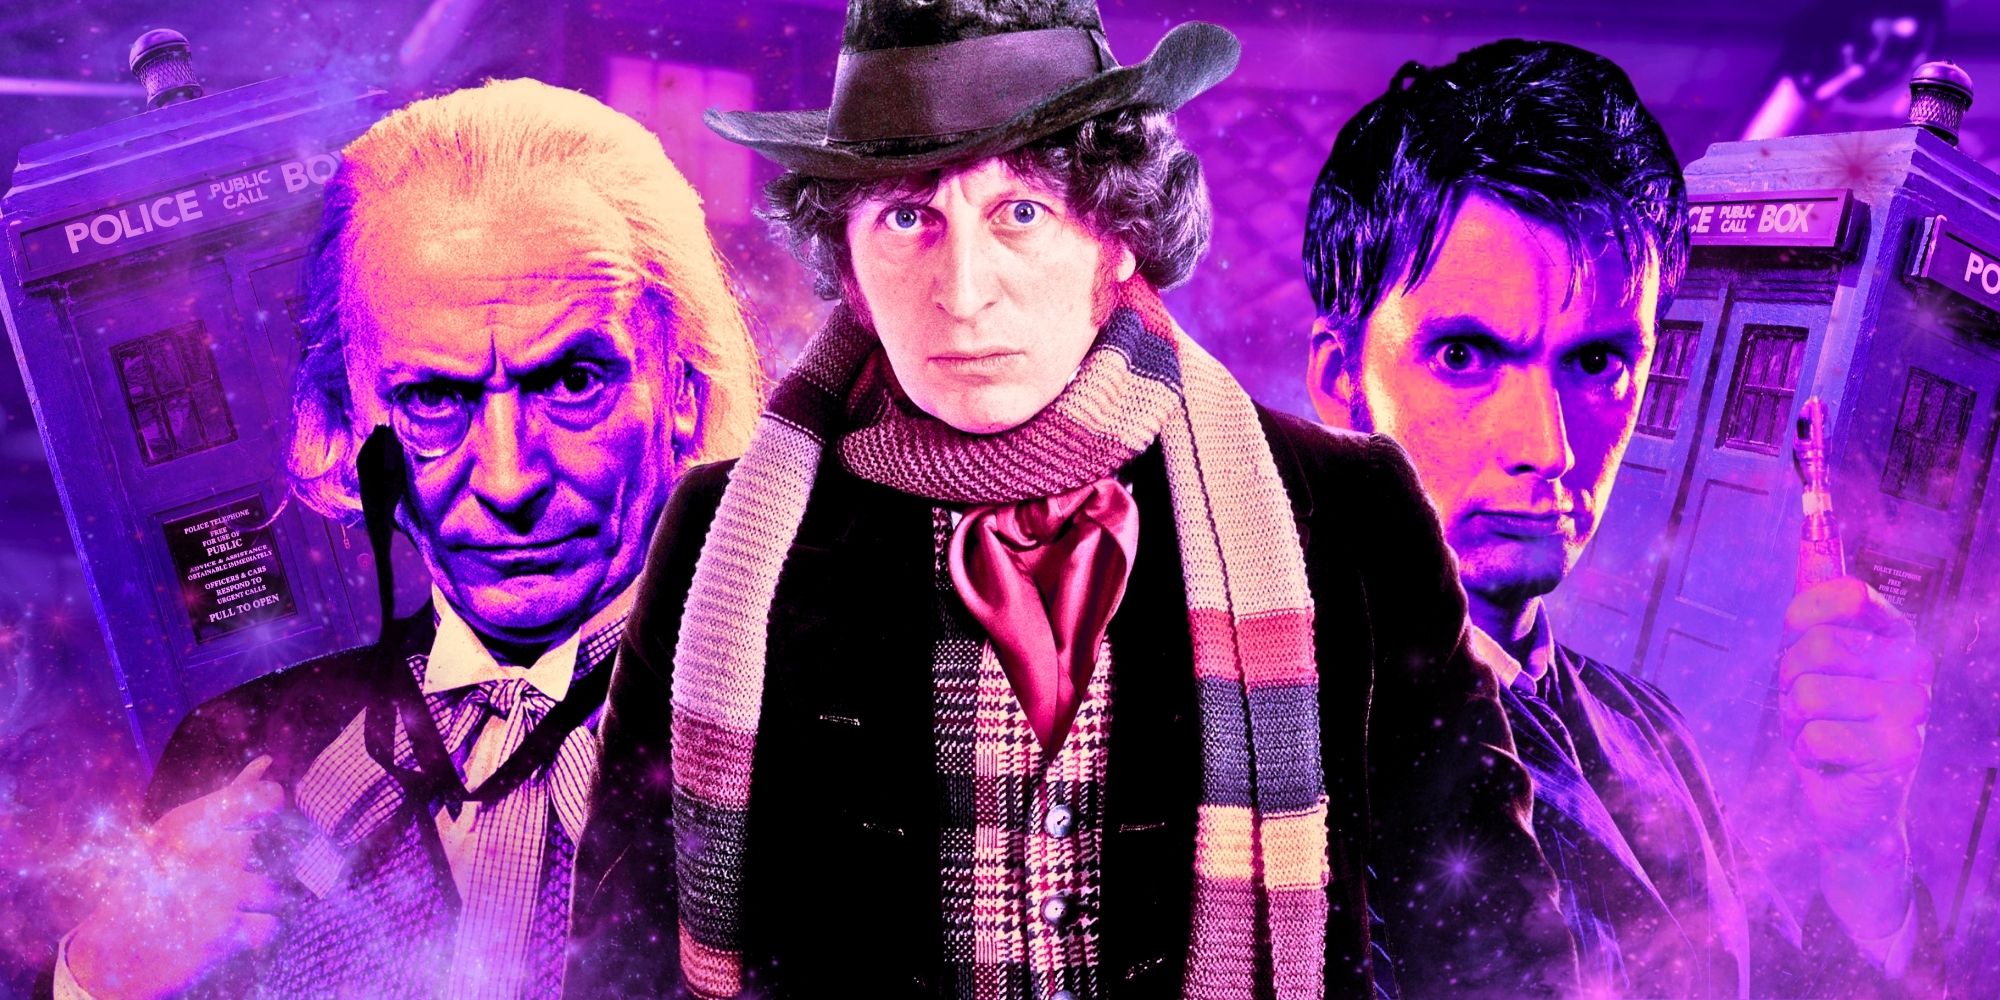 Tom Baker, William Hartnell, and David Tennant from Doctor Who as The Doctor